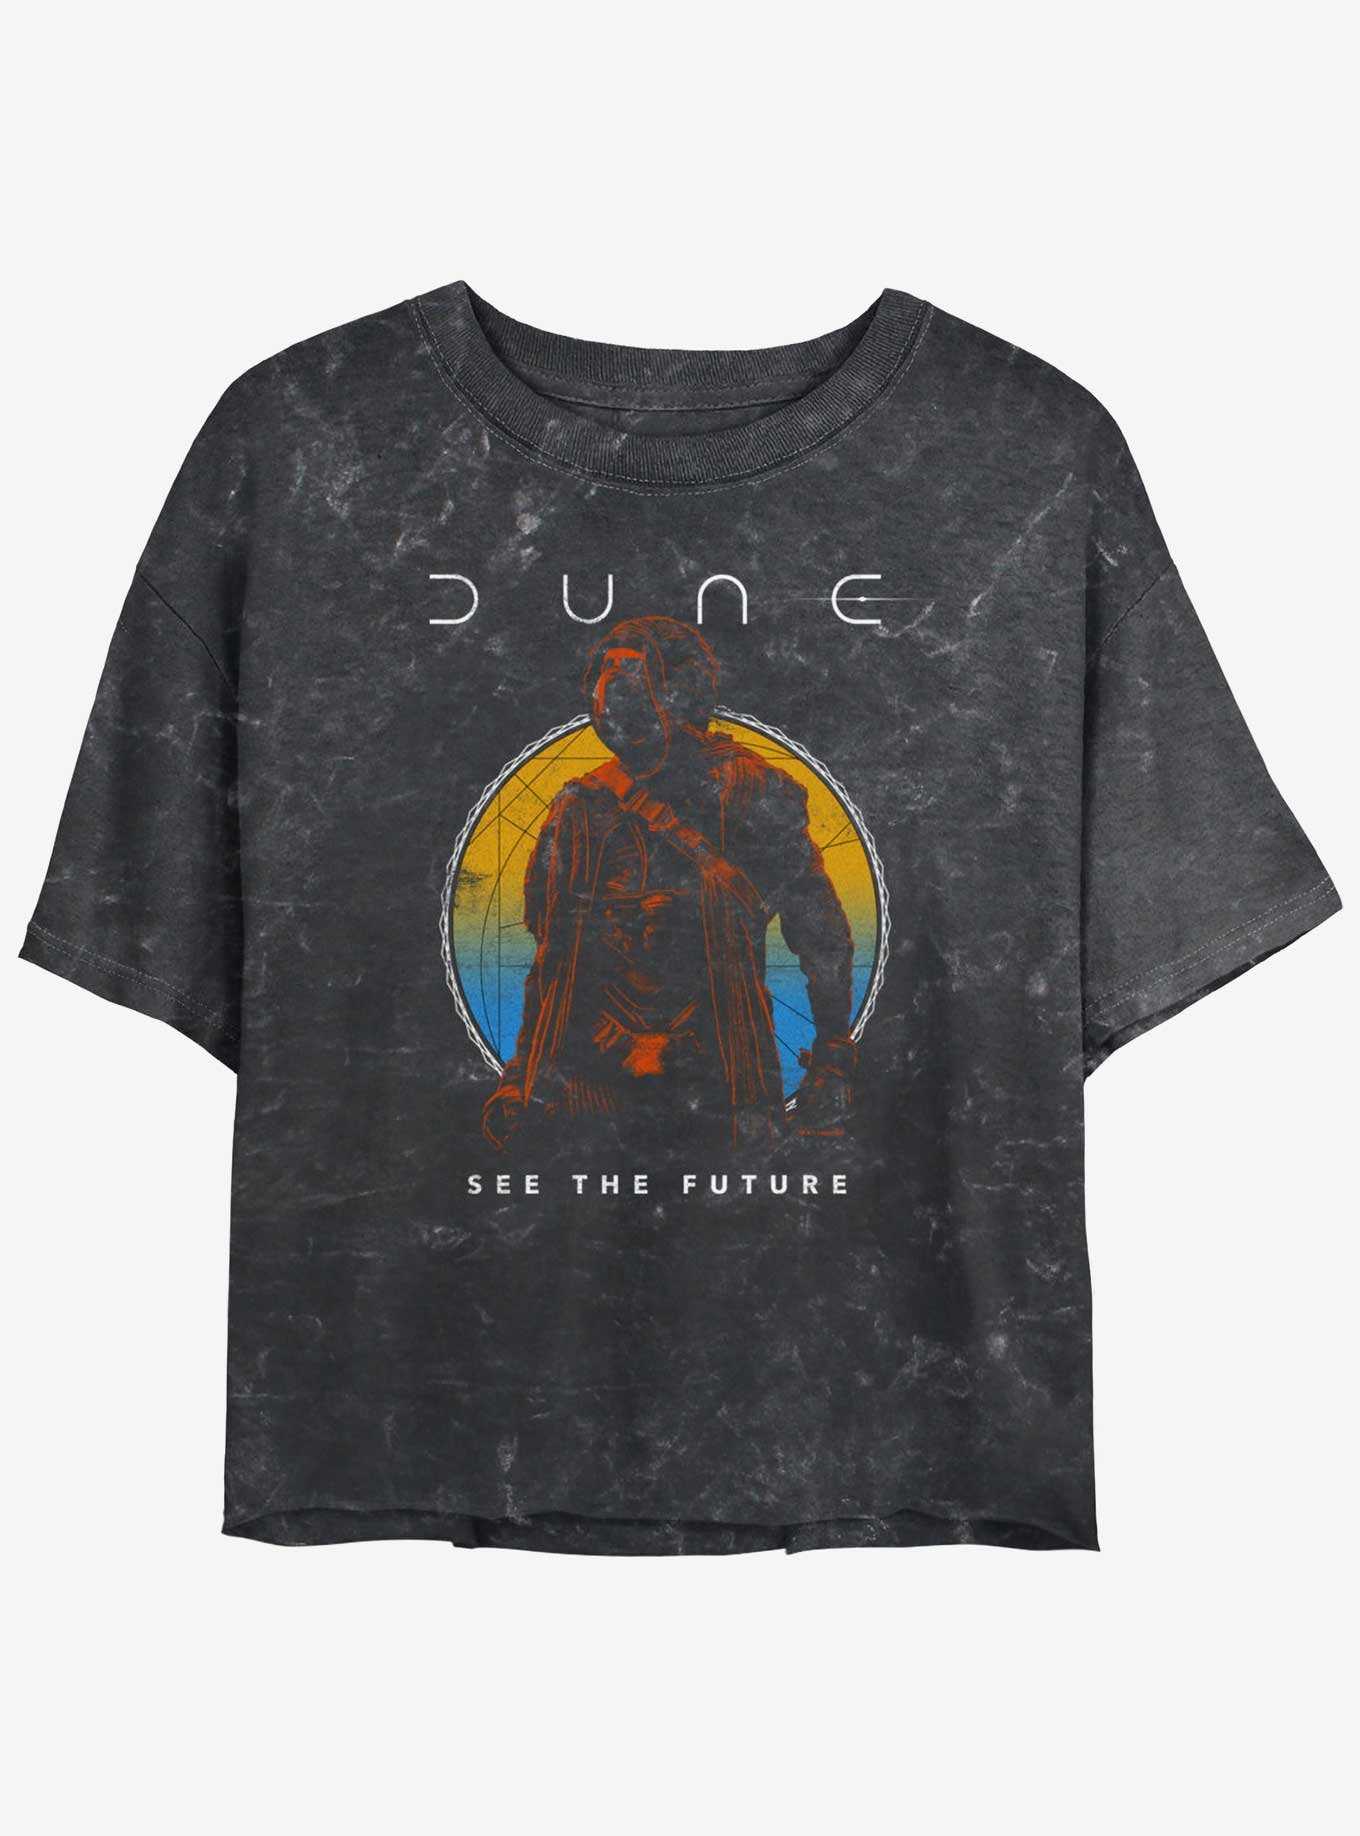 Dune: Part Two See The Future Mineral Wash Girls Crop T-Shirt, , hi-res